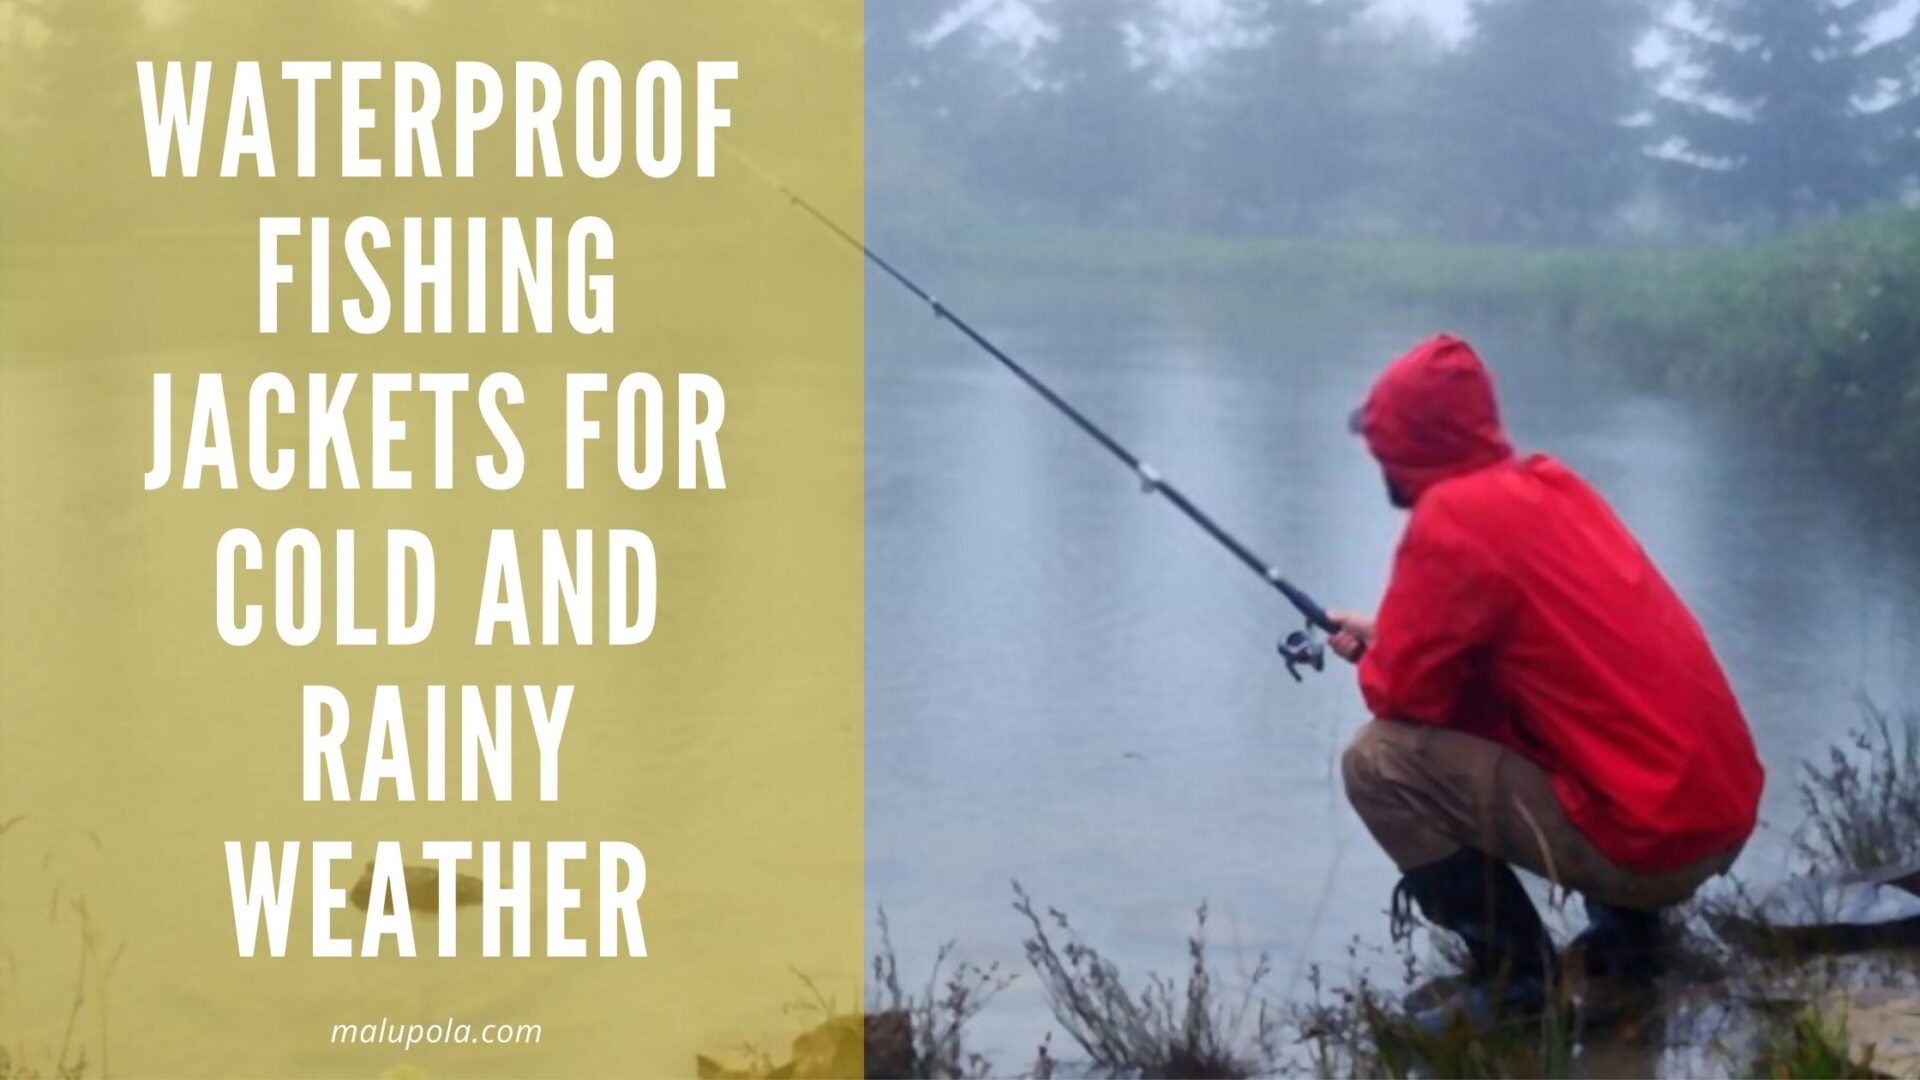 Top 5 Best Waterproof Fishing Jackets for Cold And Rainy Weather